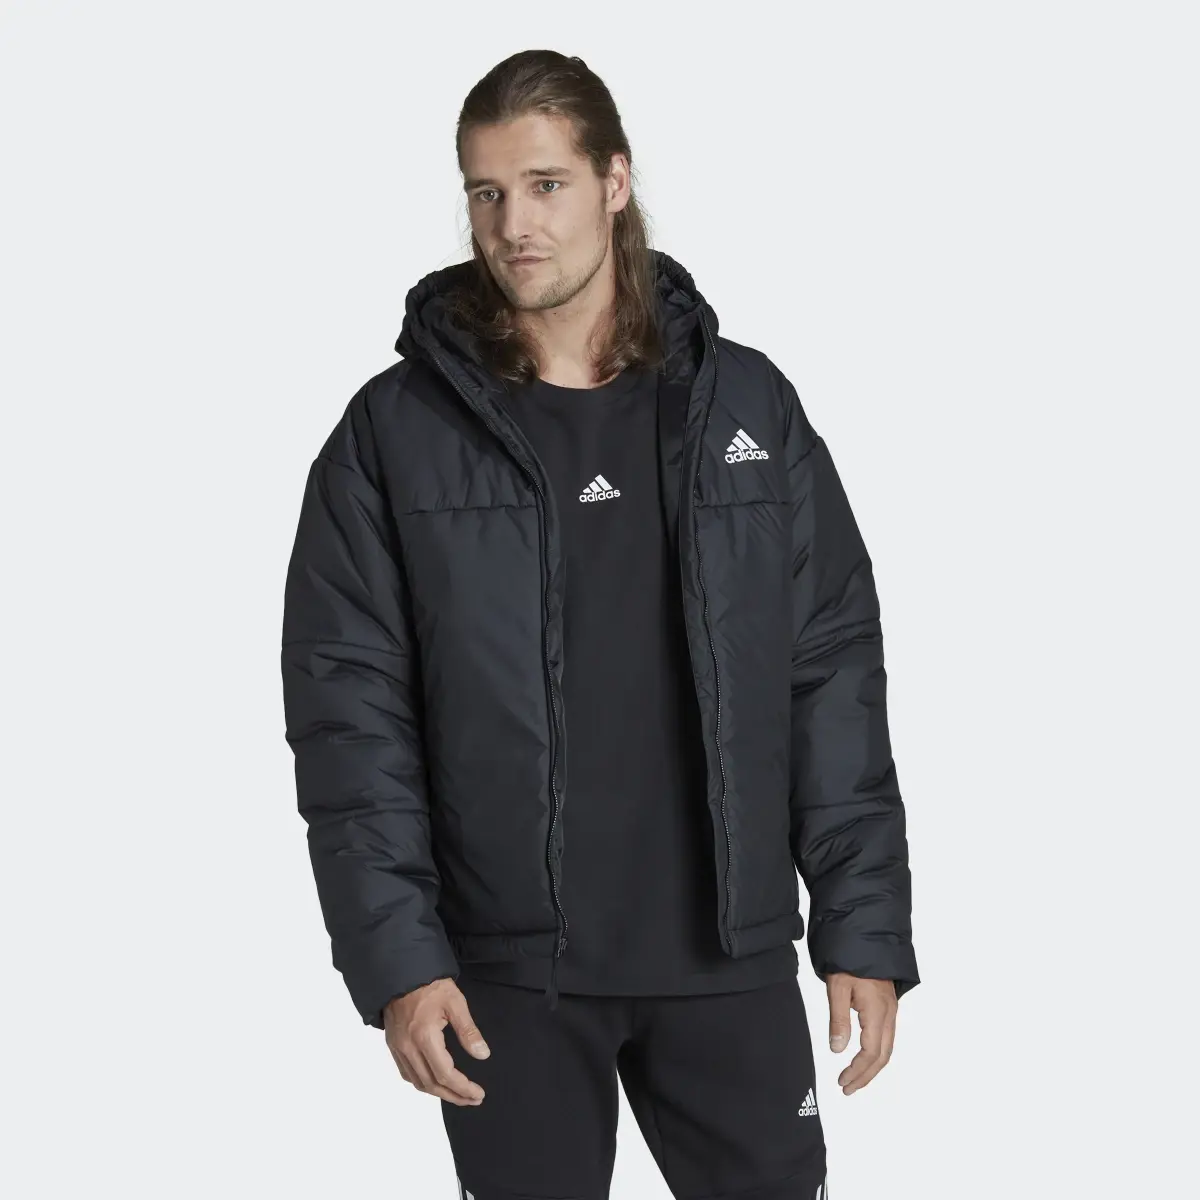 Adidas BSC 3-Stripes Puffy Hooded Jacket. 2